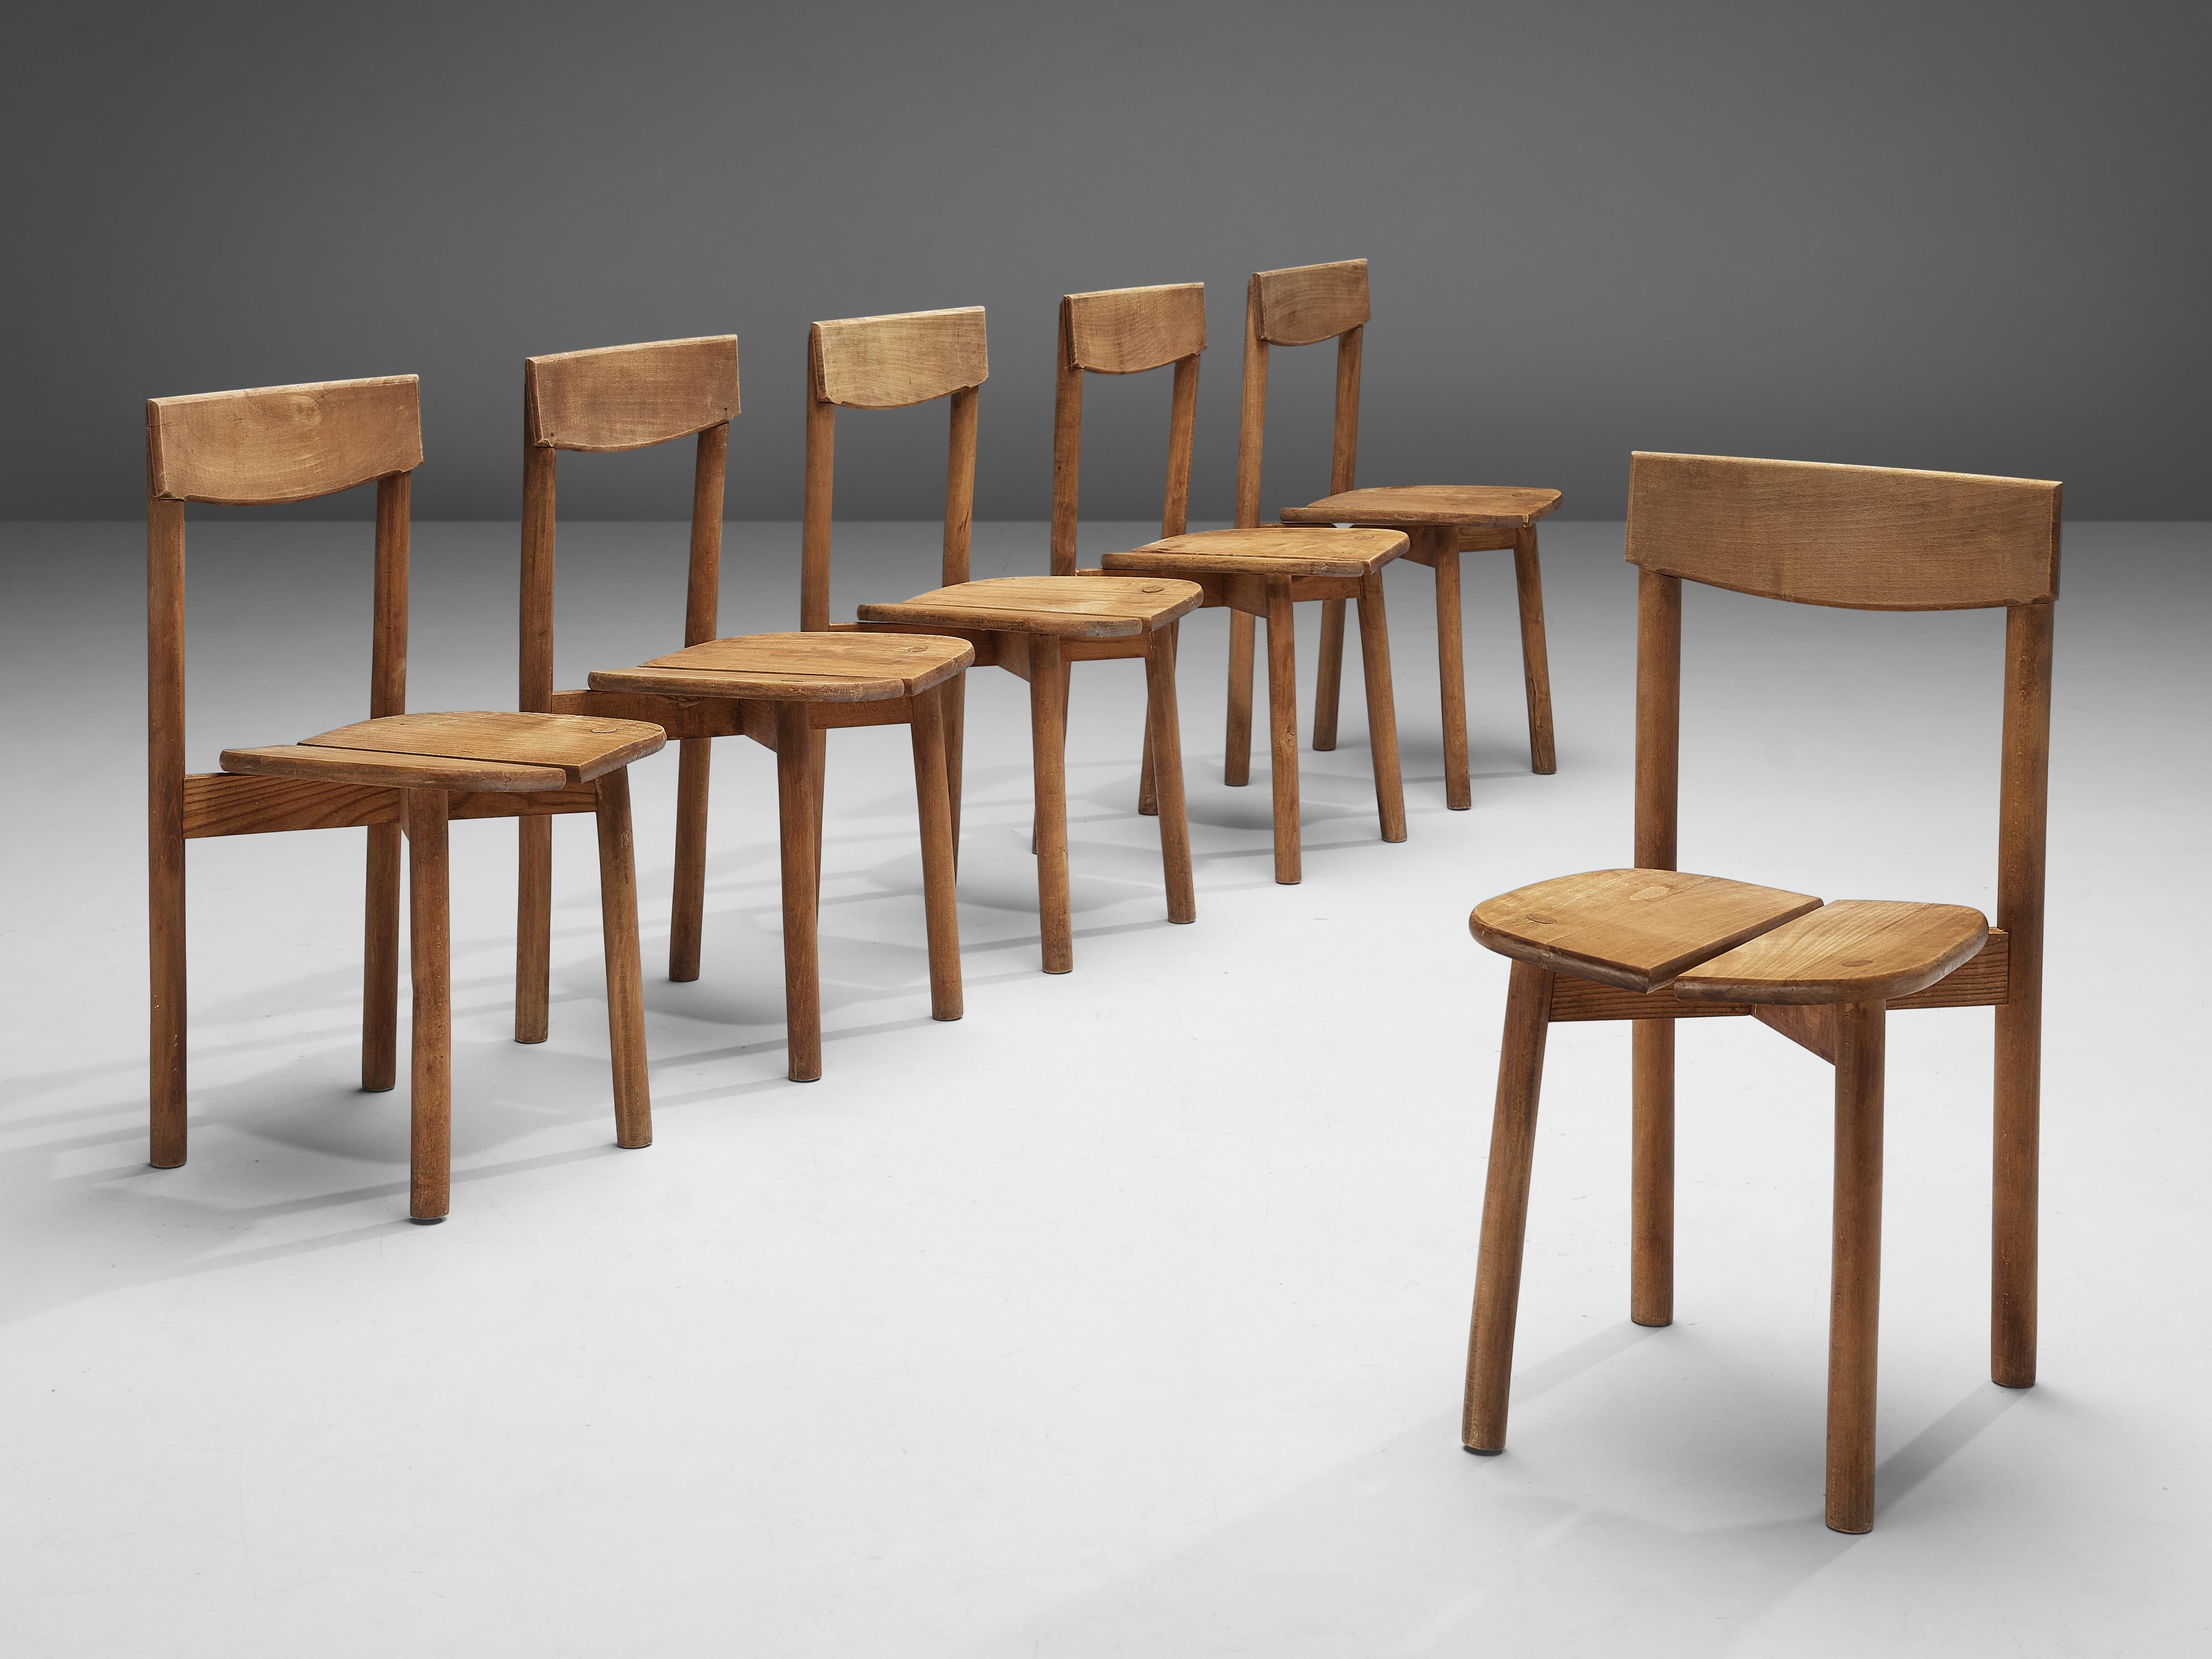 Pierre Gautier-Delaye, set of six dining chairs, beech, France, 1960s

This set of subtle and modest dining chairs are executed in stained beechwood. The seating area is divided into two organically shaped slats and is detailed with wood-joints of